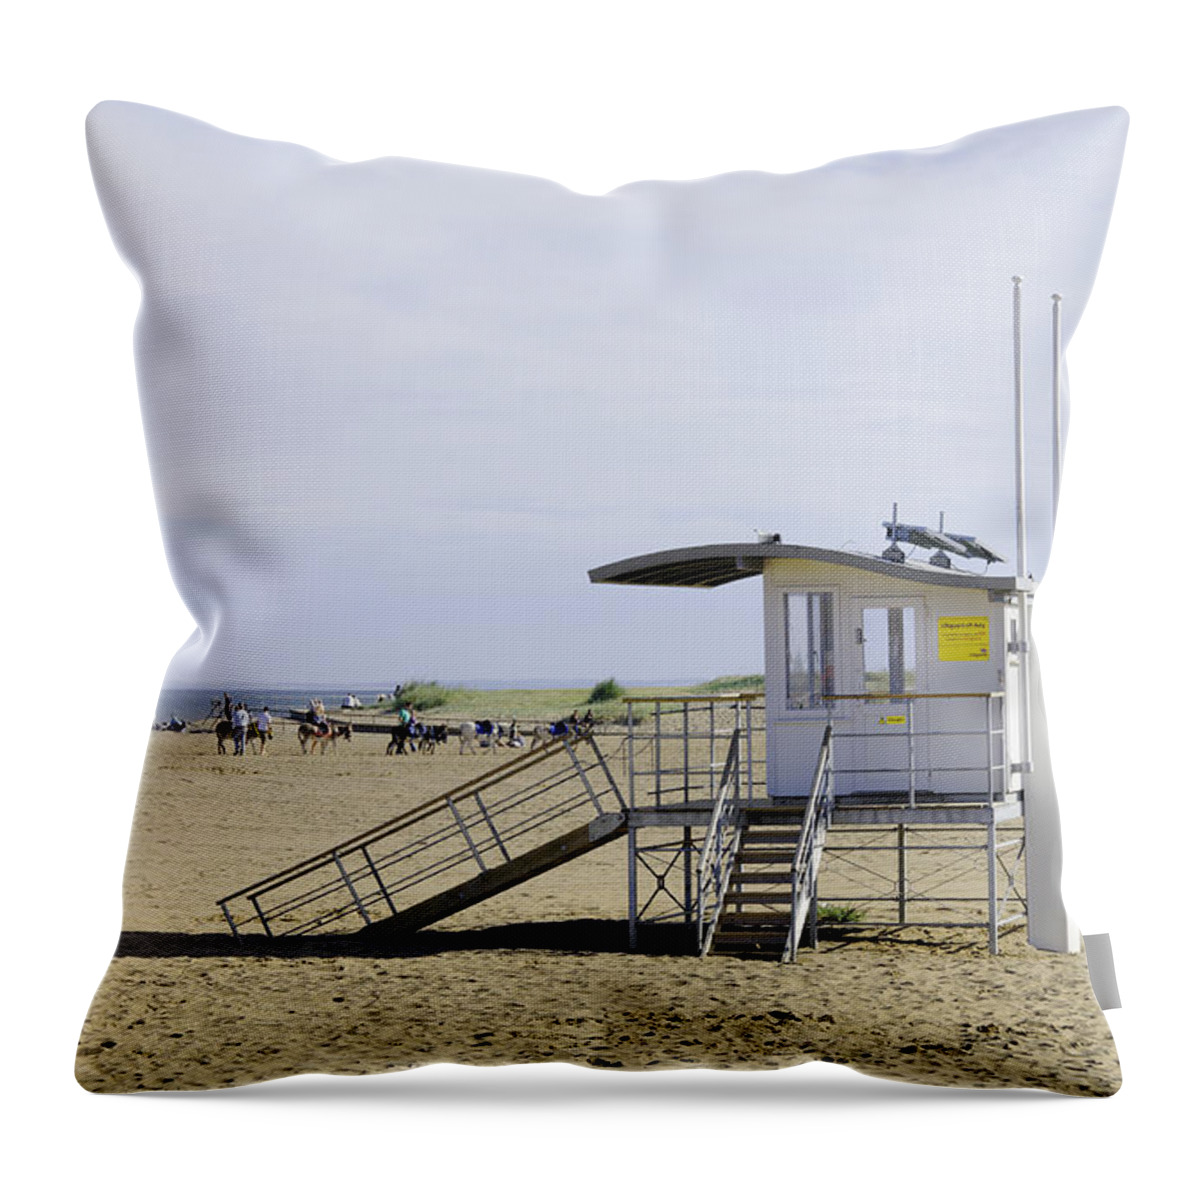 Skegness Throw Pillow featuring the photograph Lifeguard Station, Skegness by Rod Johnson